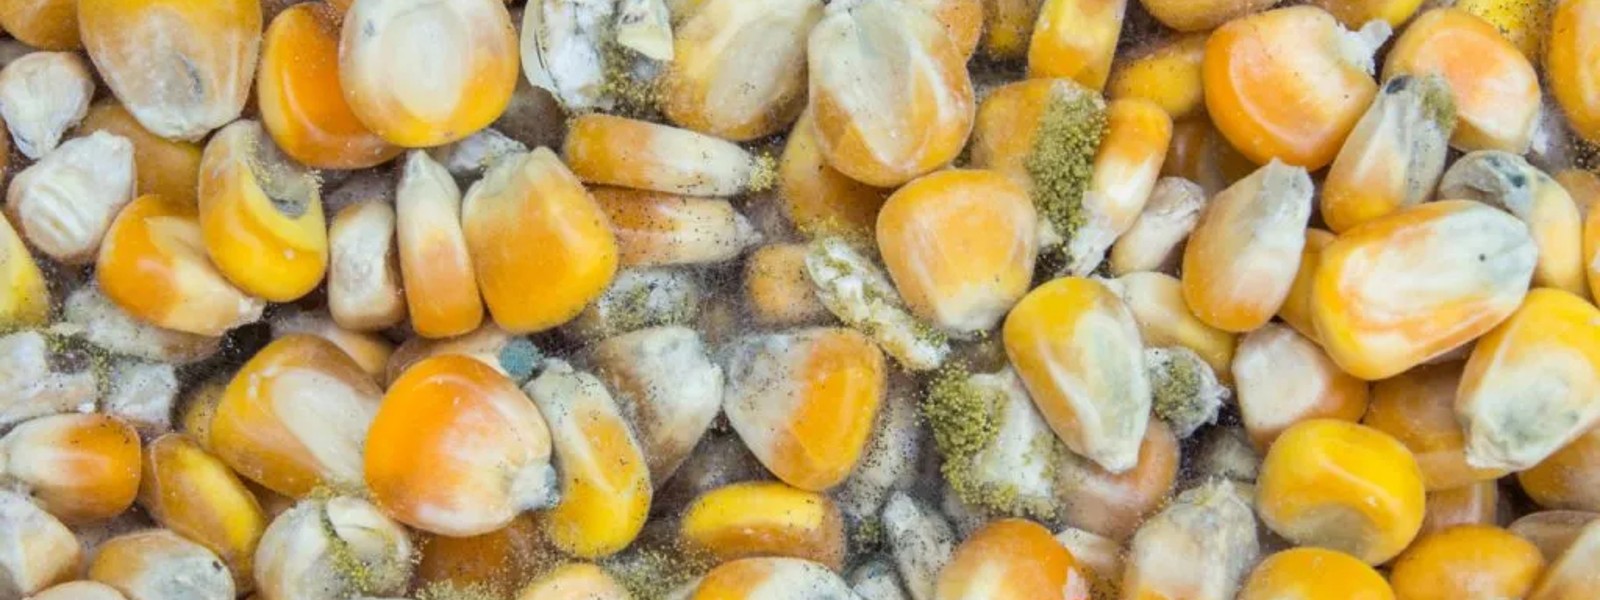 15 corn kernel containers with Aflatoxin suspended from being released to market